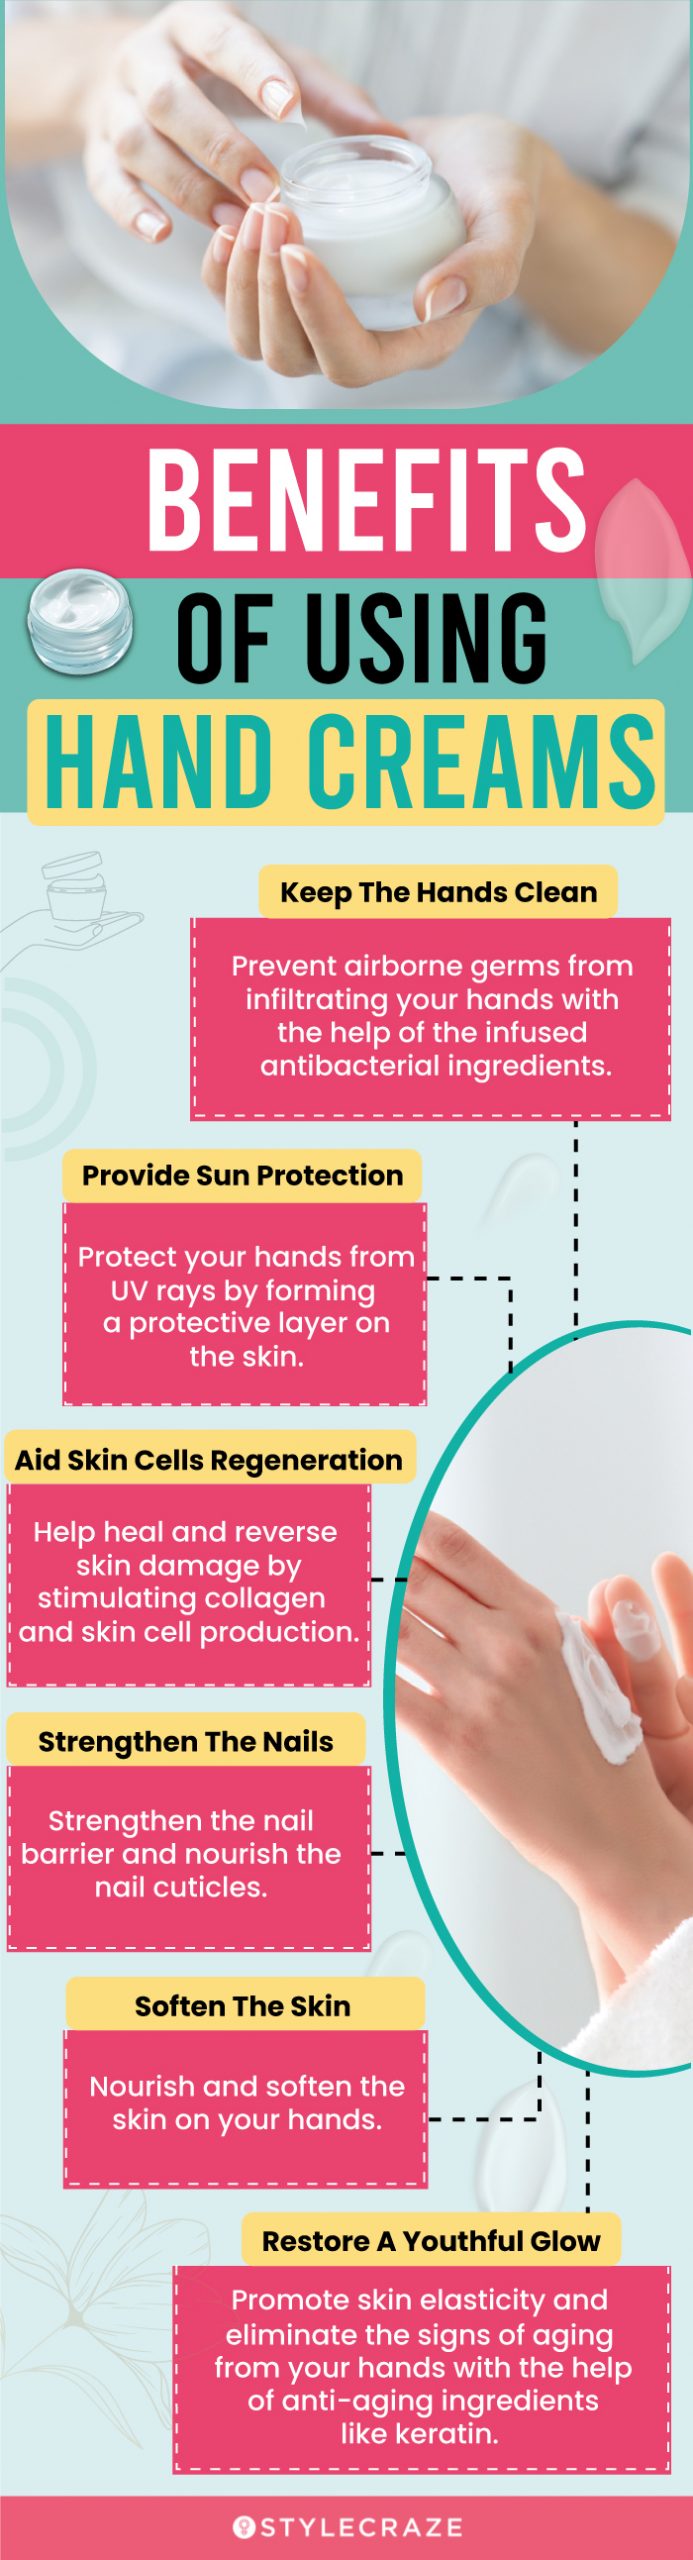 Benefits Of Using Hand Creams (infographic)